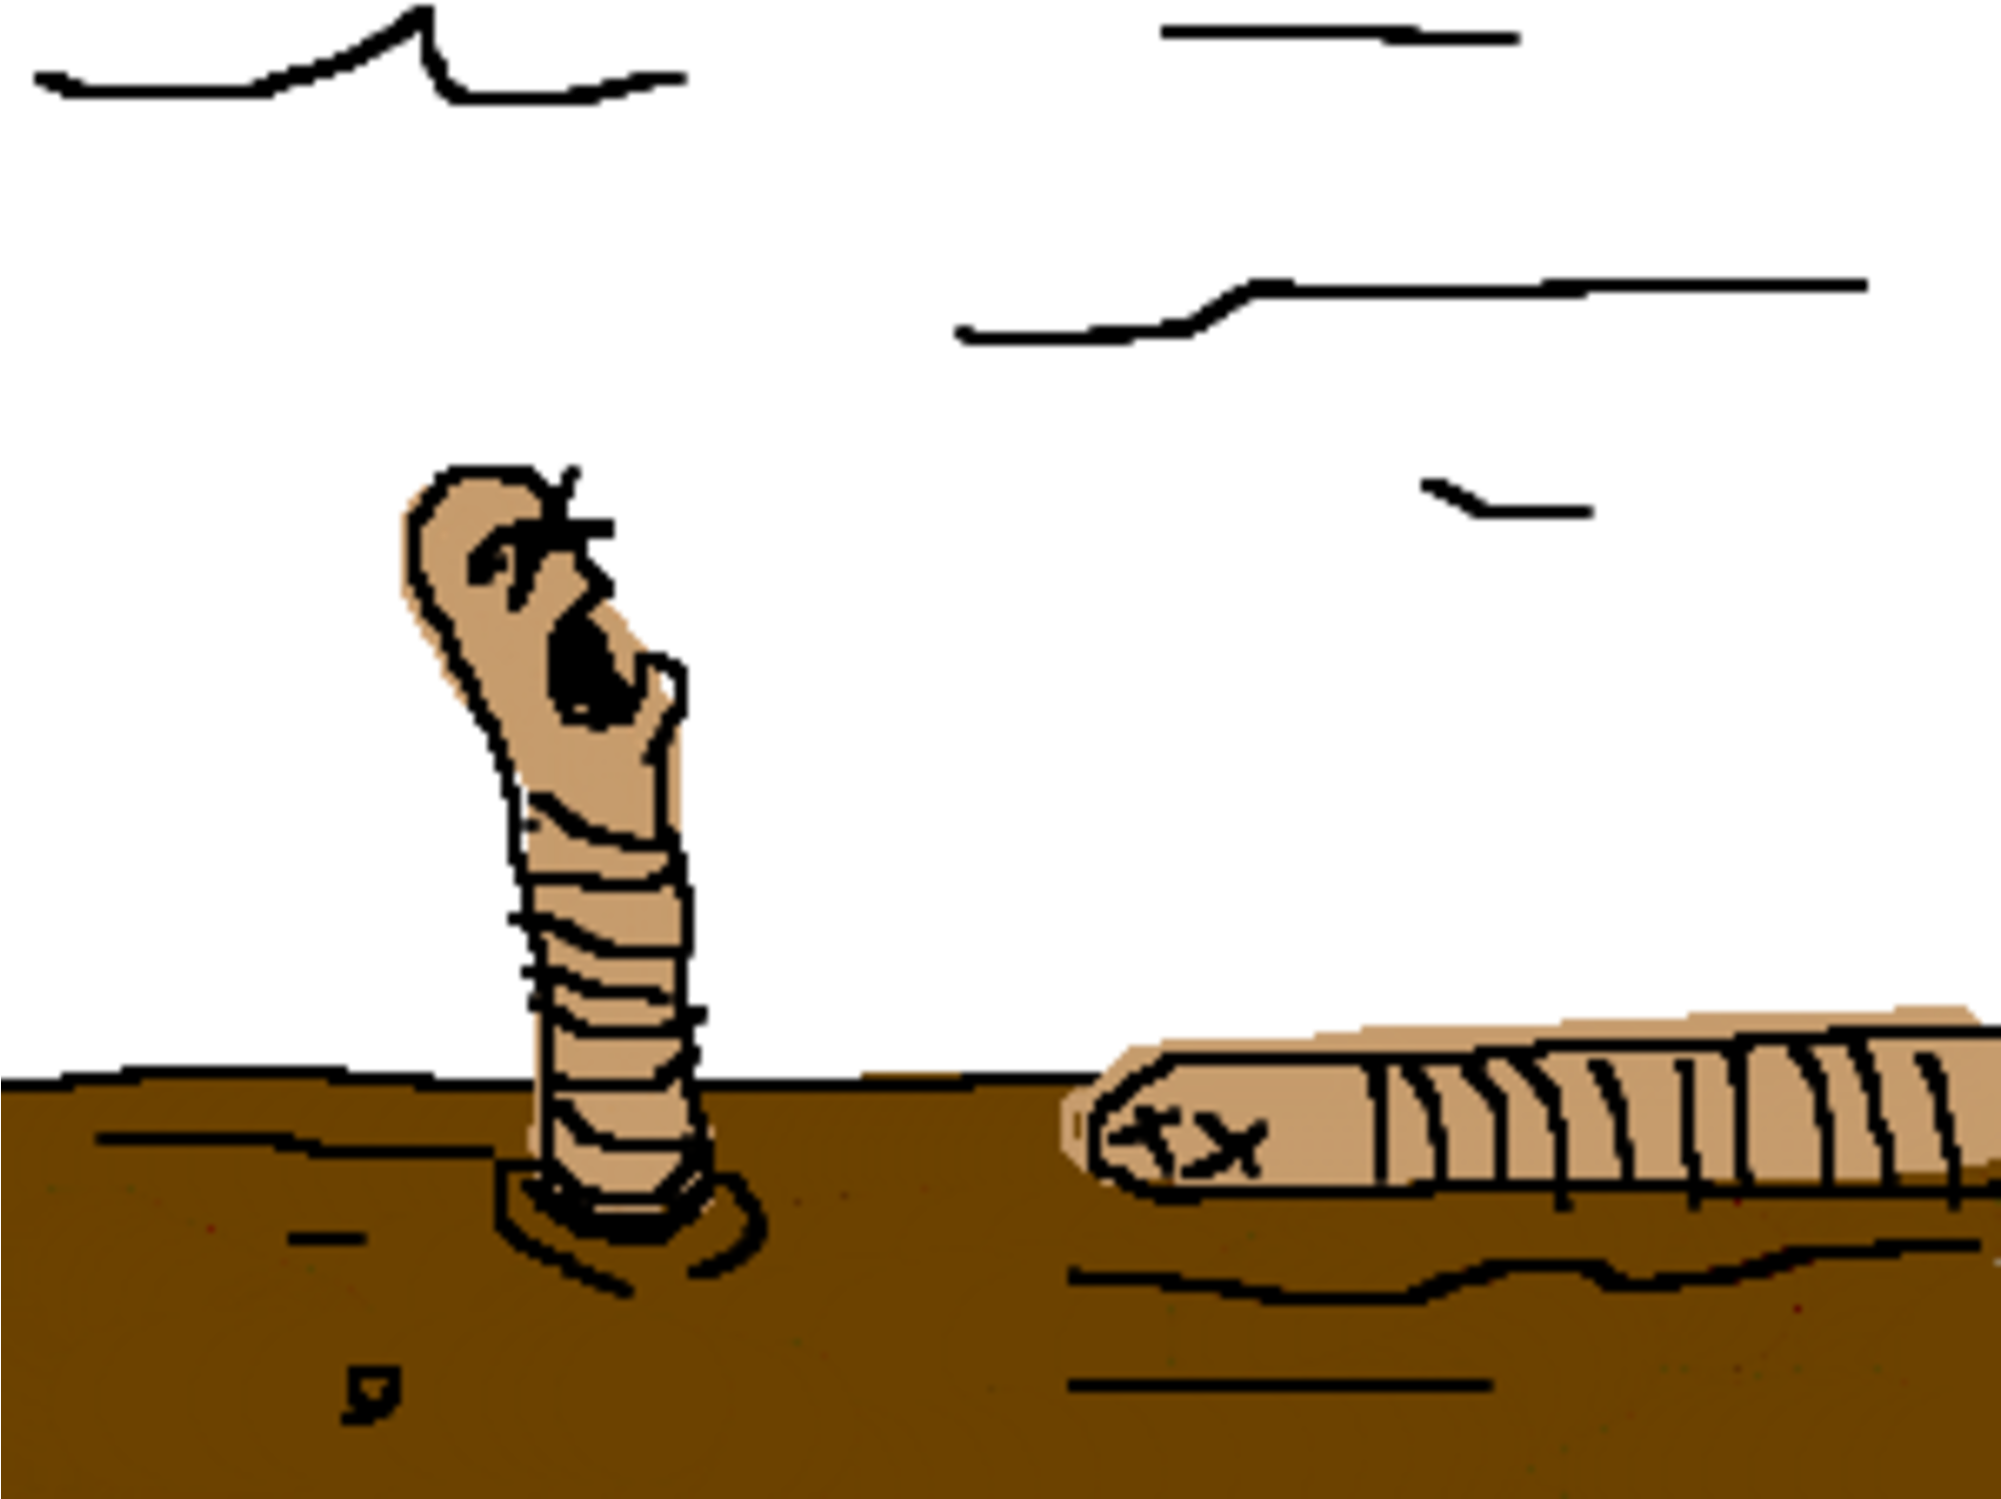 Worms In Dirt Clipart.